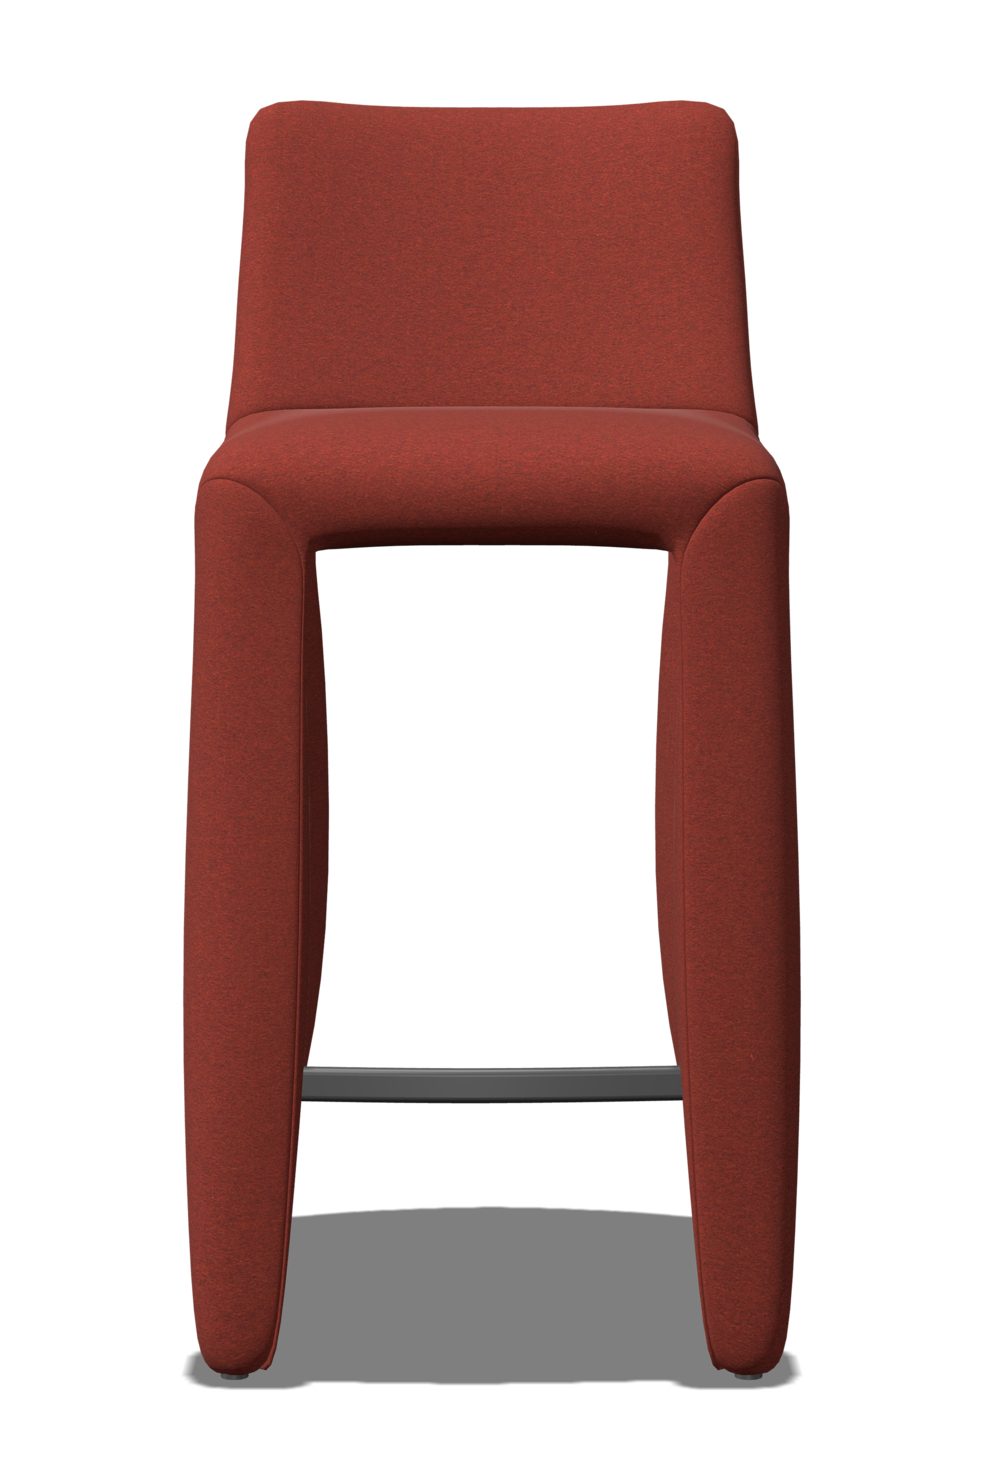 Monster Barstool low no stitching red